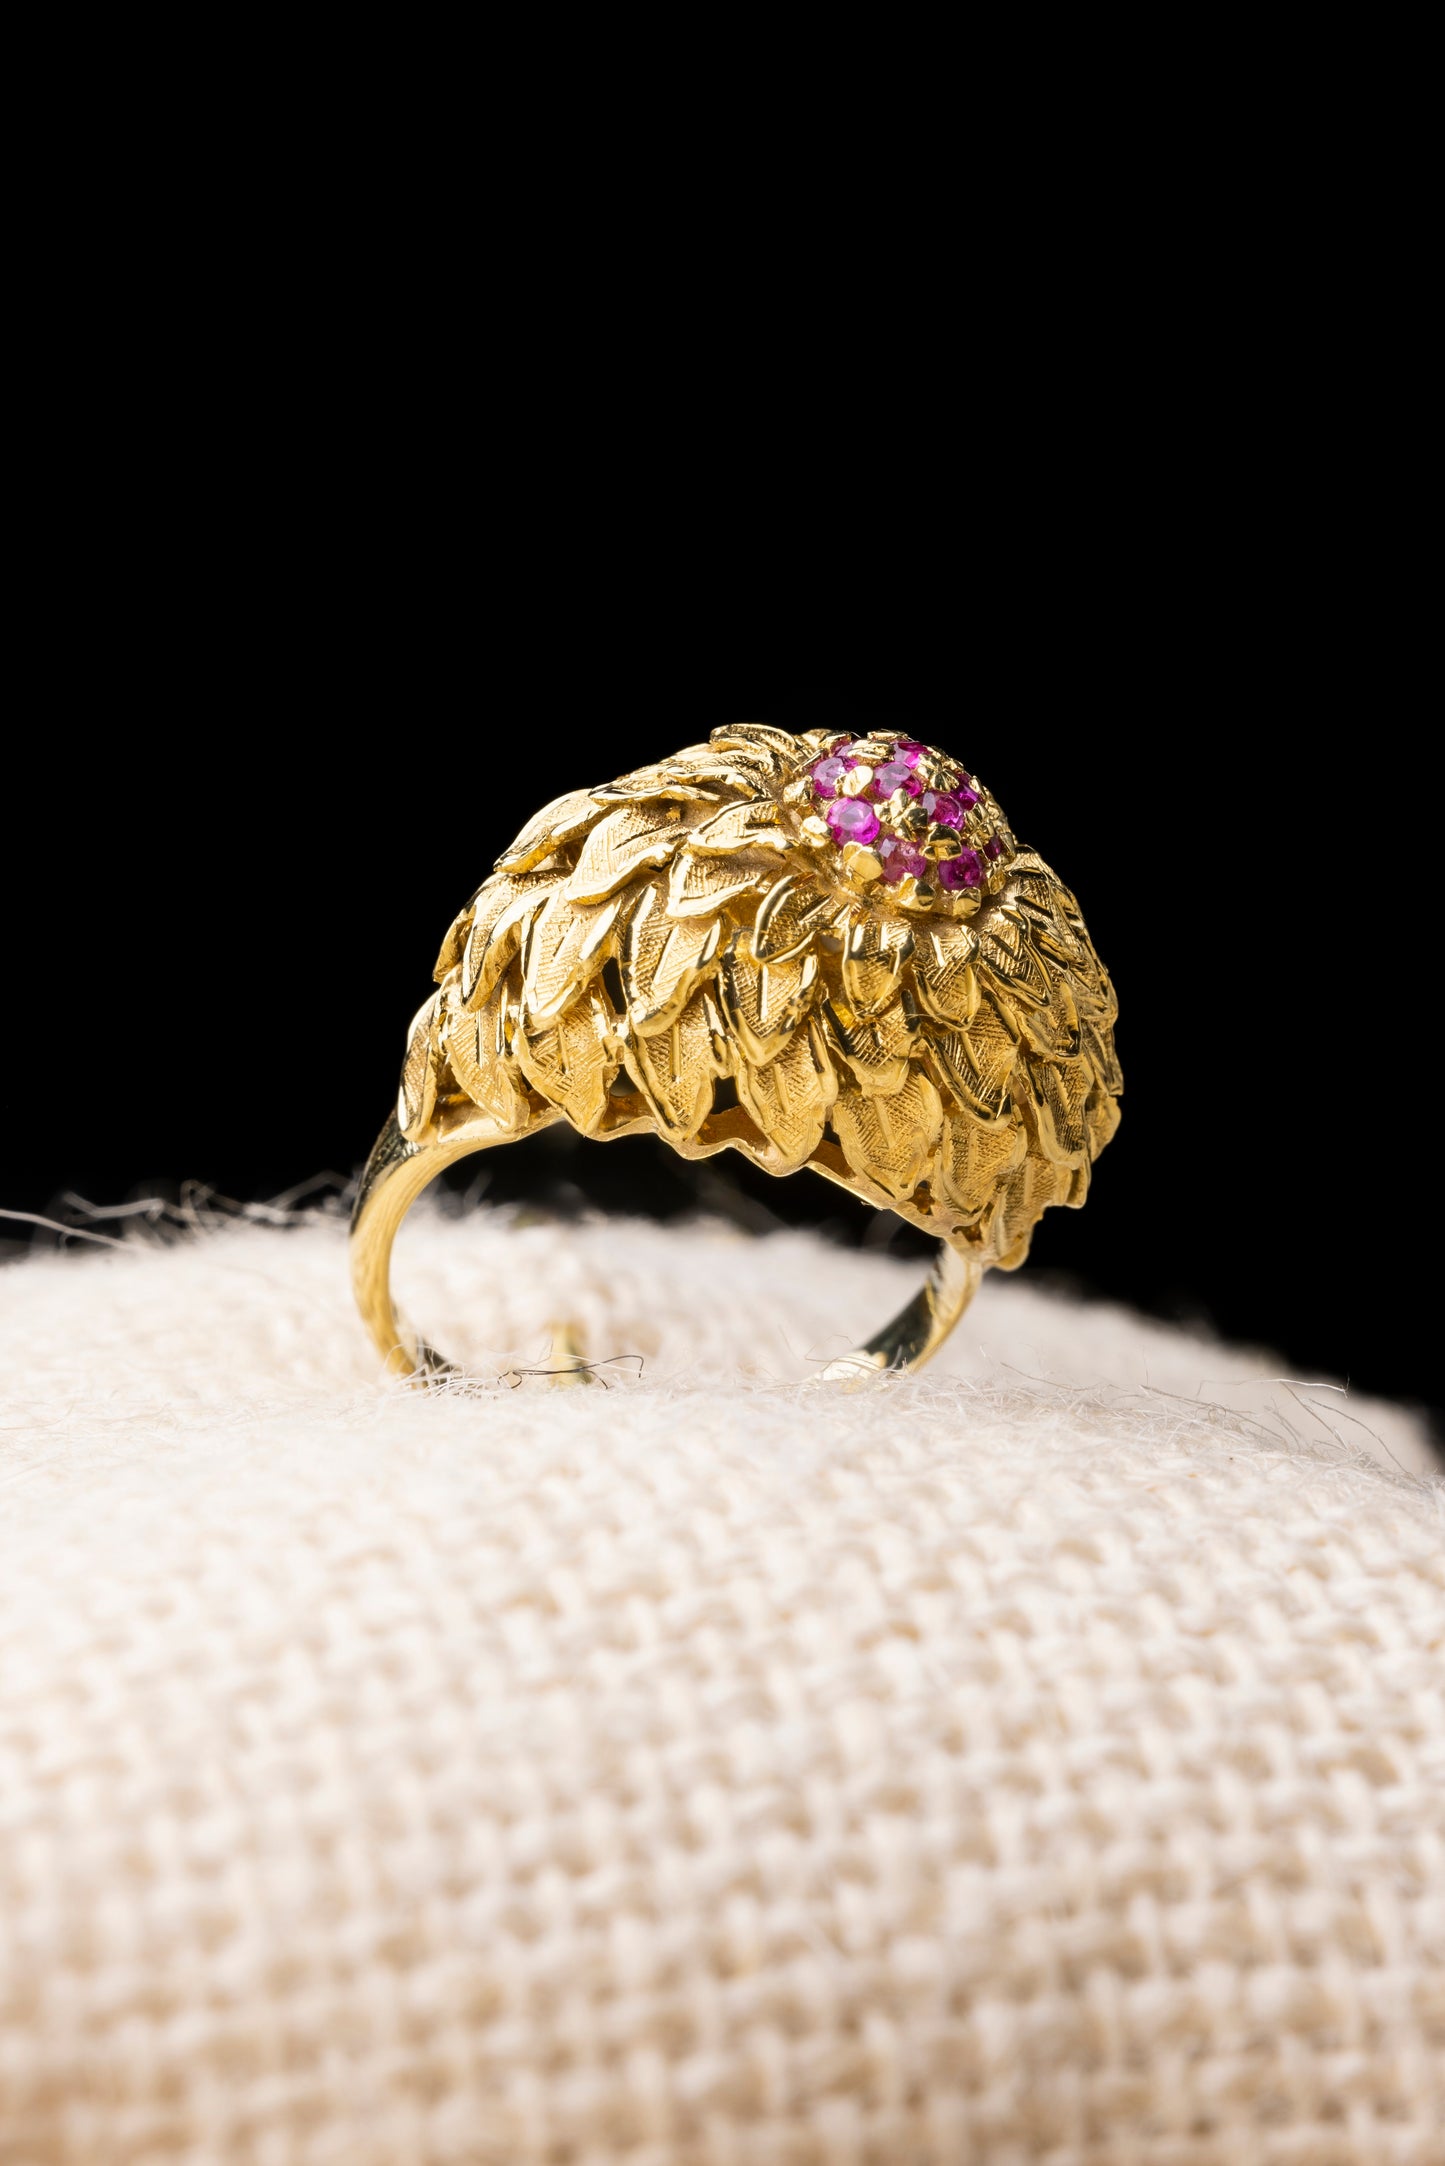 An 18 kt yellow gold ring with pink sapphire